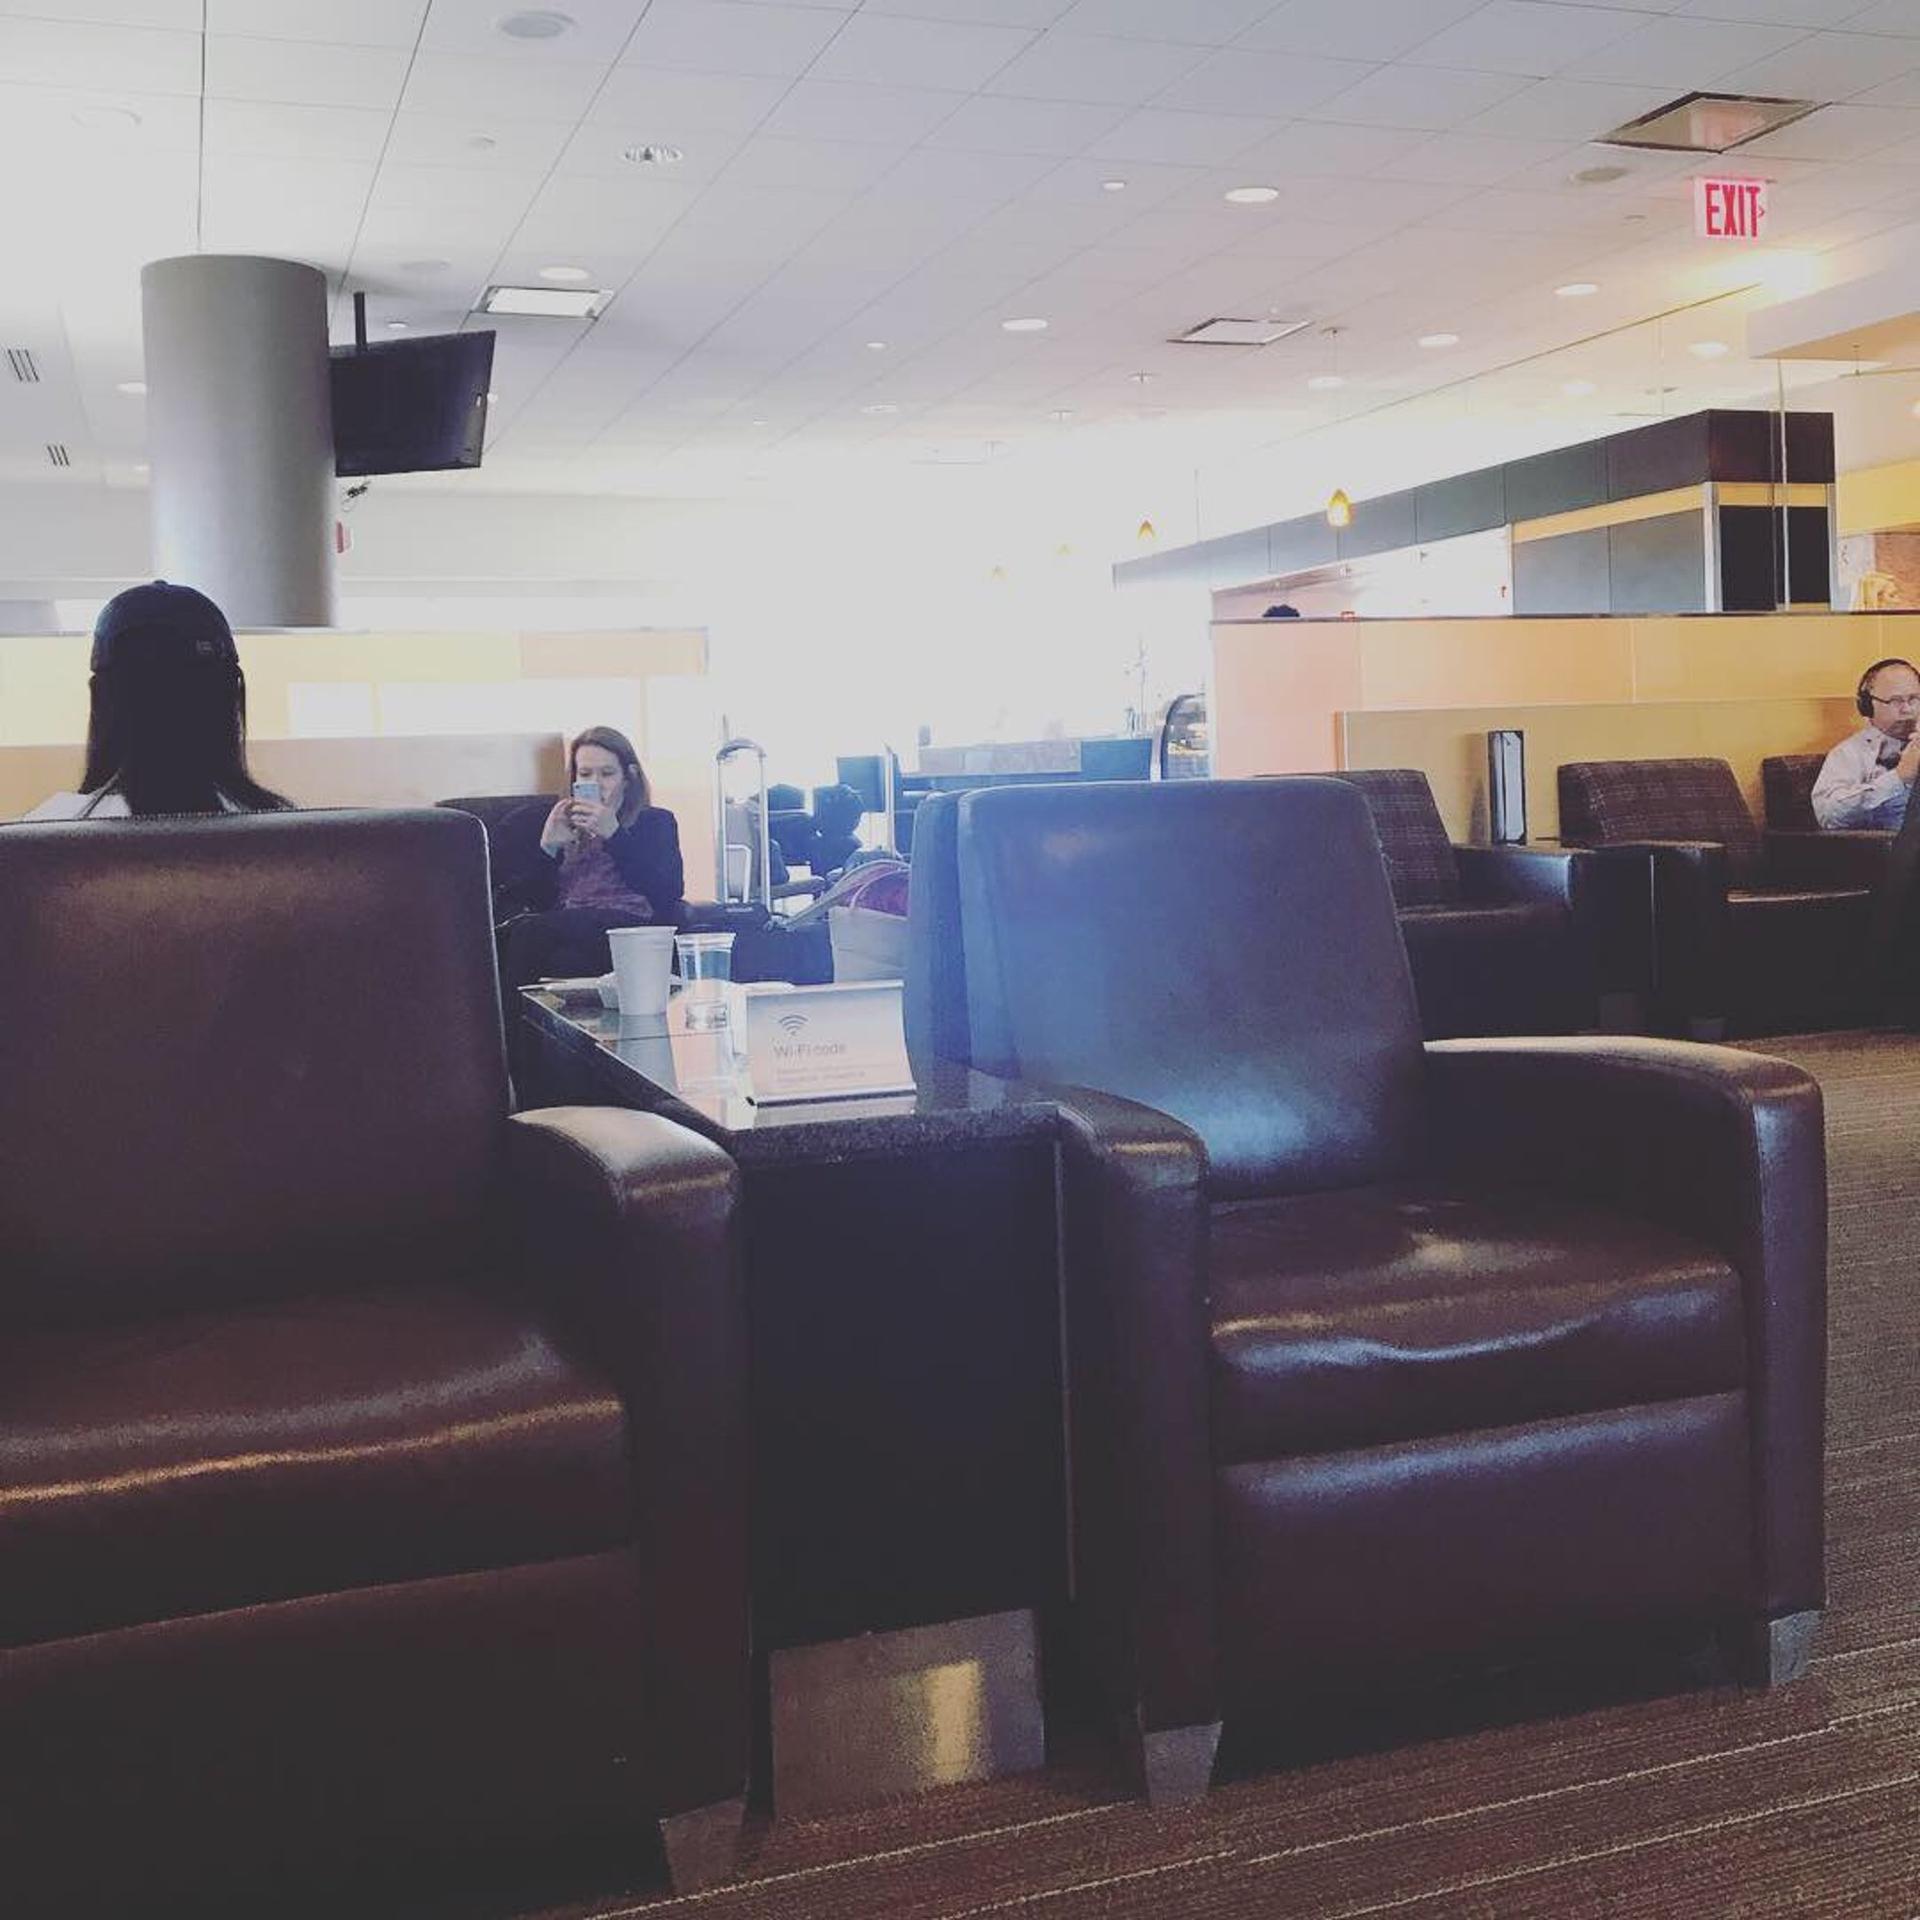 American Airlines Admirals Club image 18 of 25